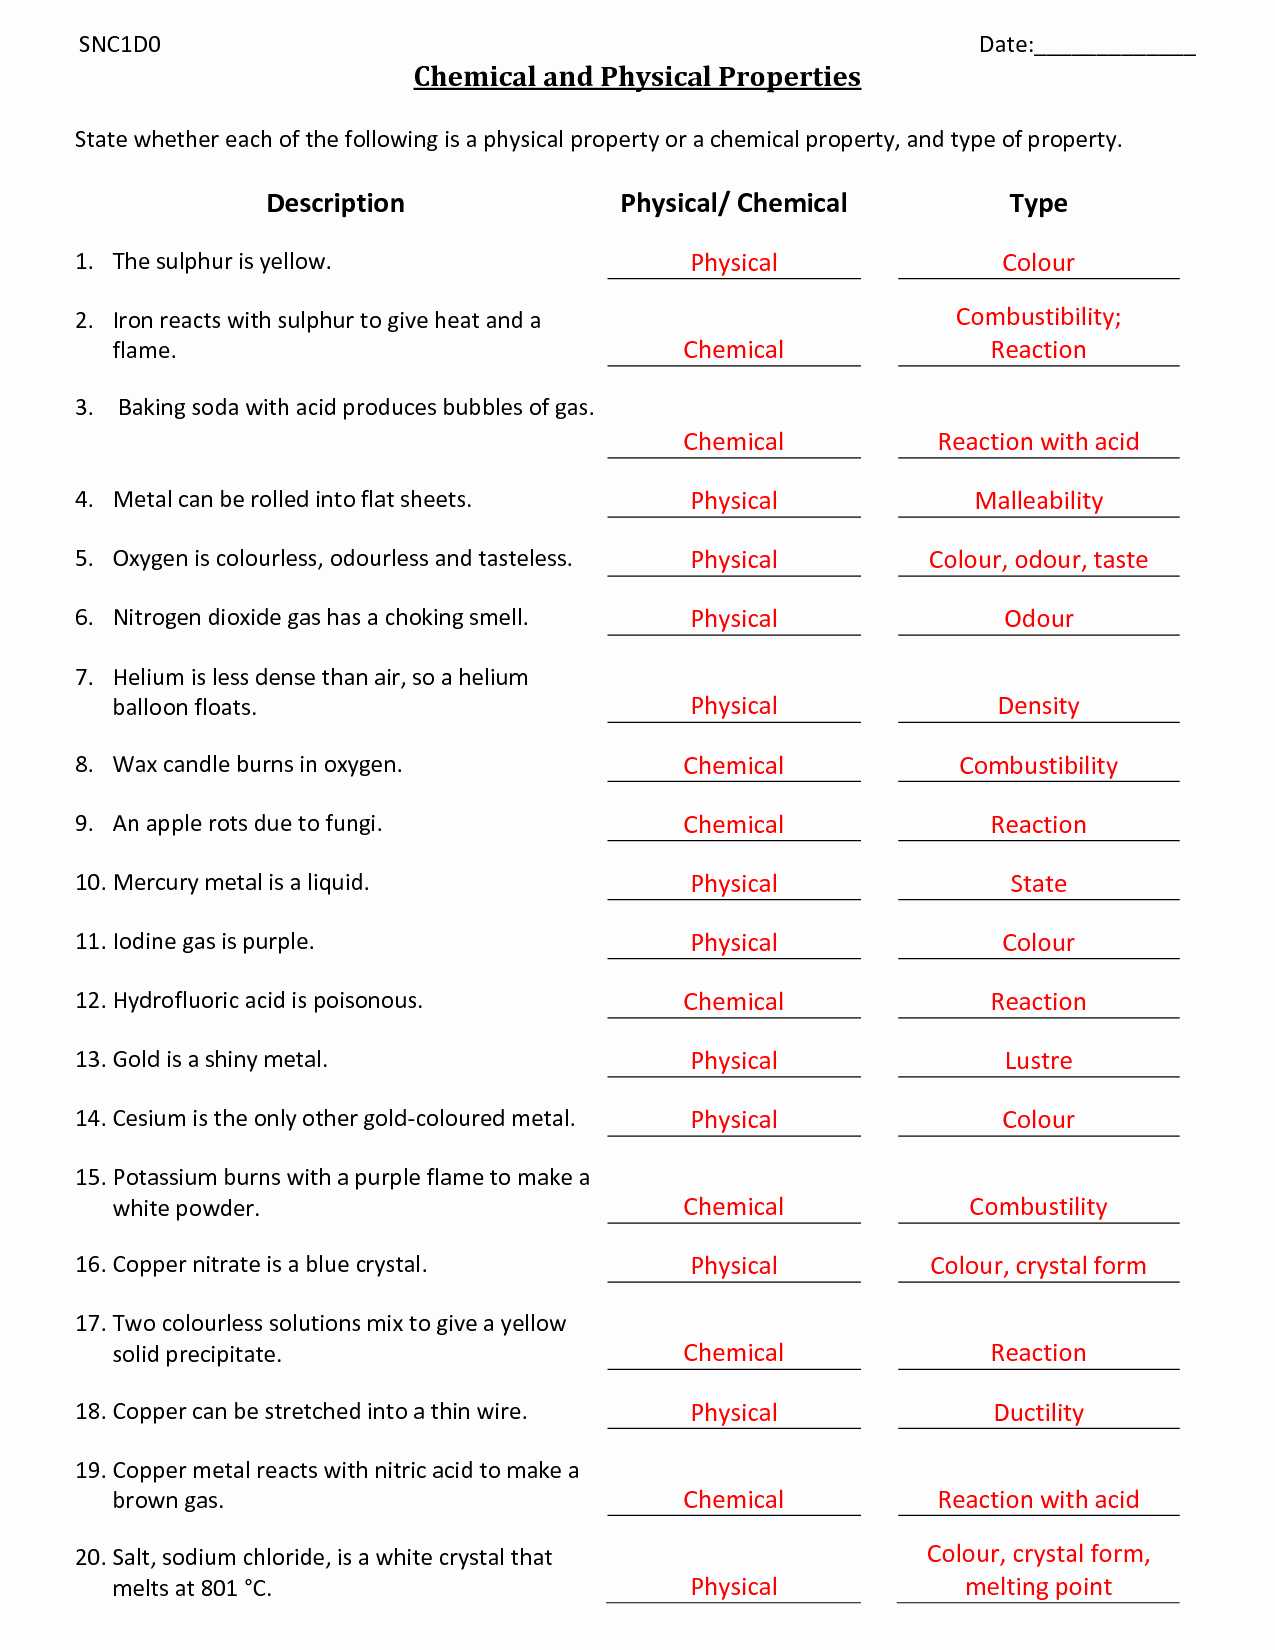 Balancing Chemical Reactions Worksheet Answers as Well as 20 Balancing Chemical Equations Worksheet Answer Key Document